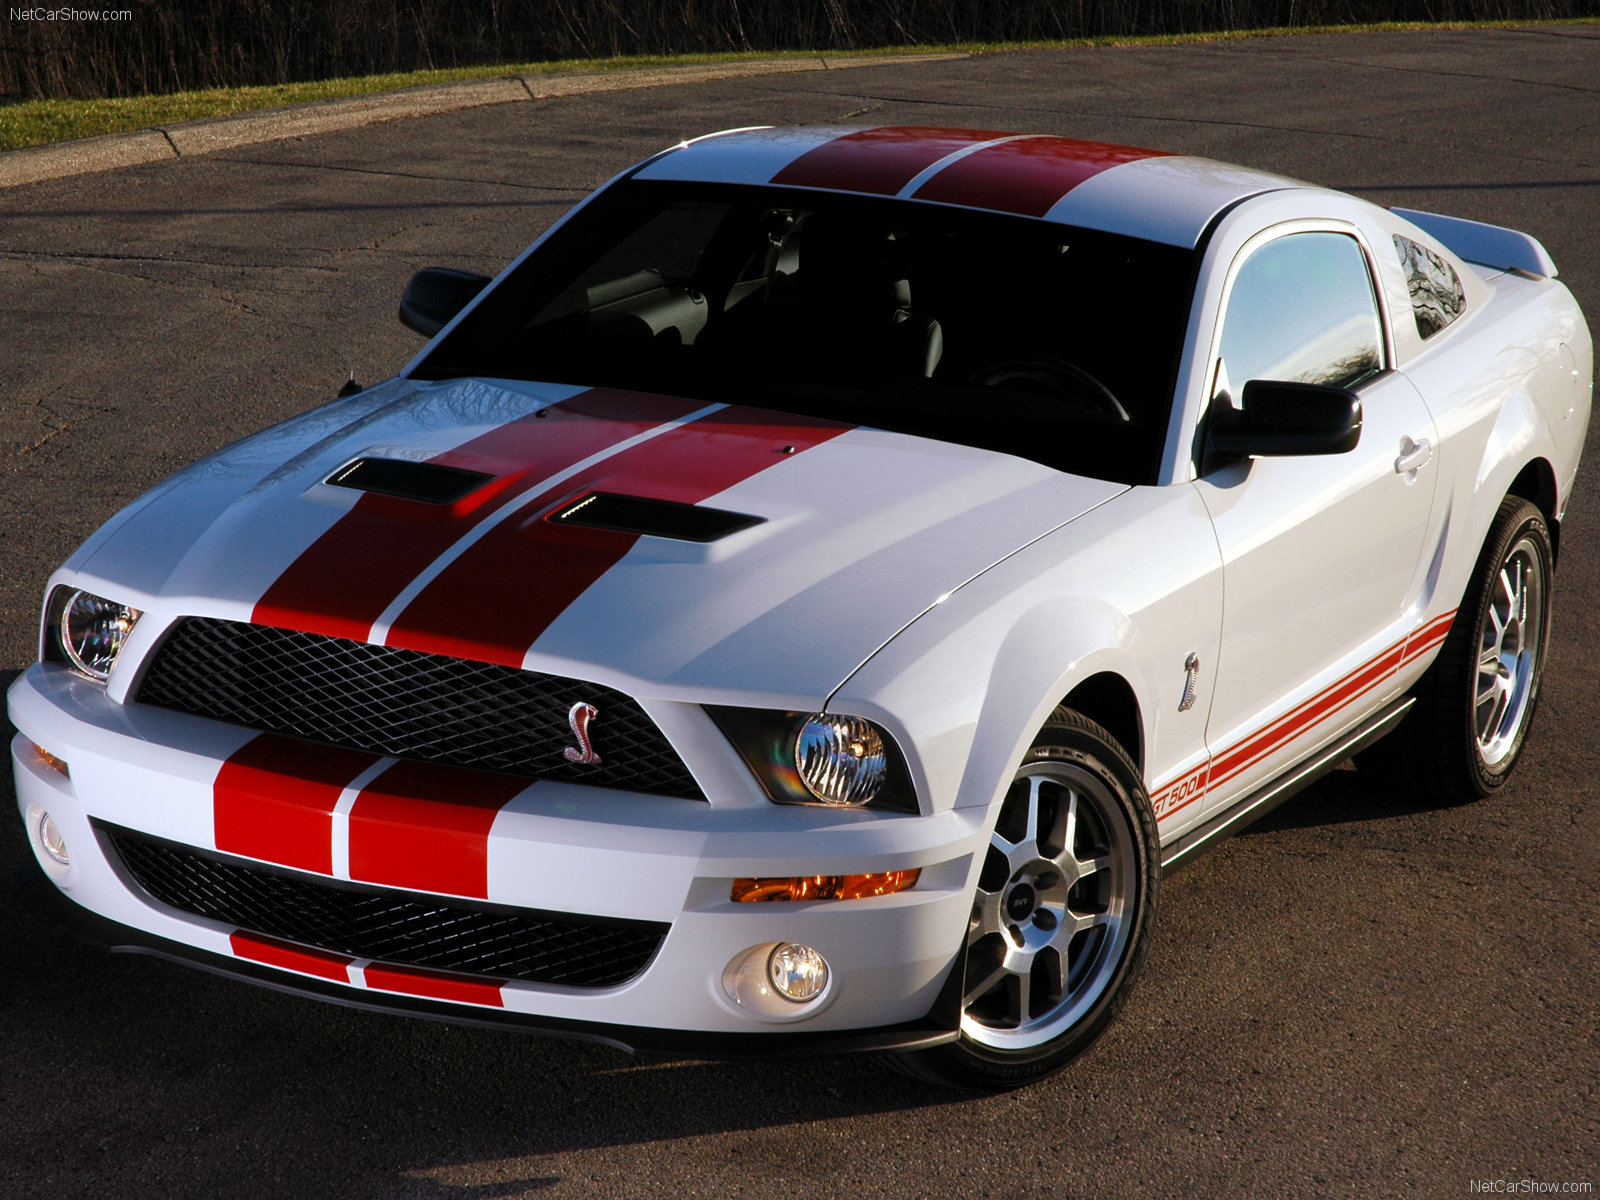 Ford Mustang Shelby Gt500 Red Stripe 2007 Wallpapers Hd Desktop